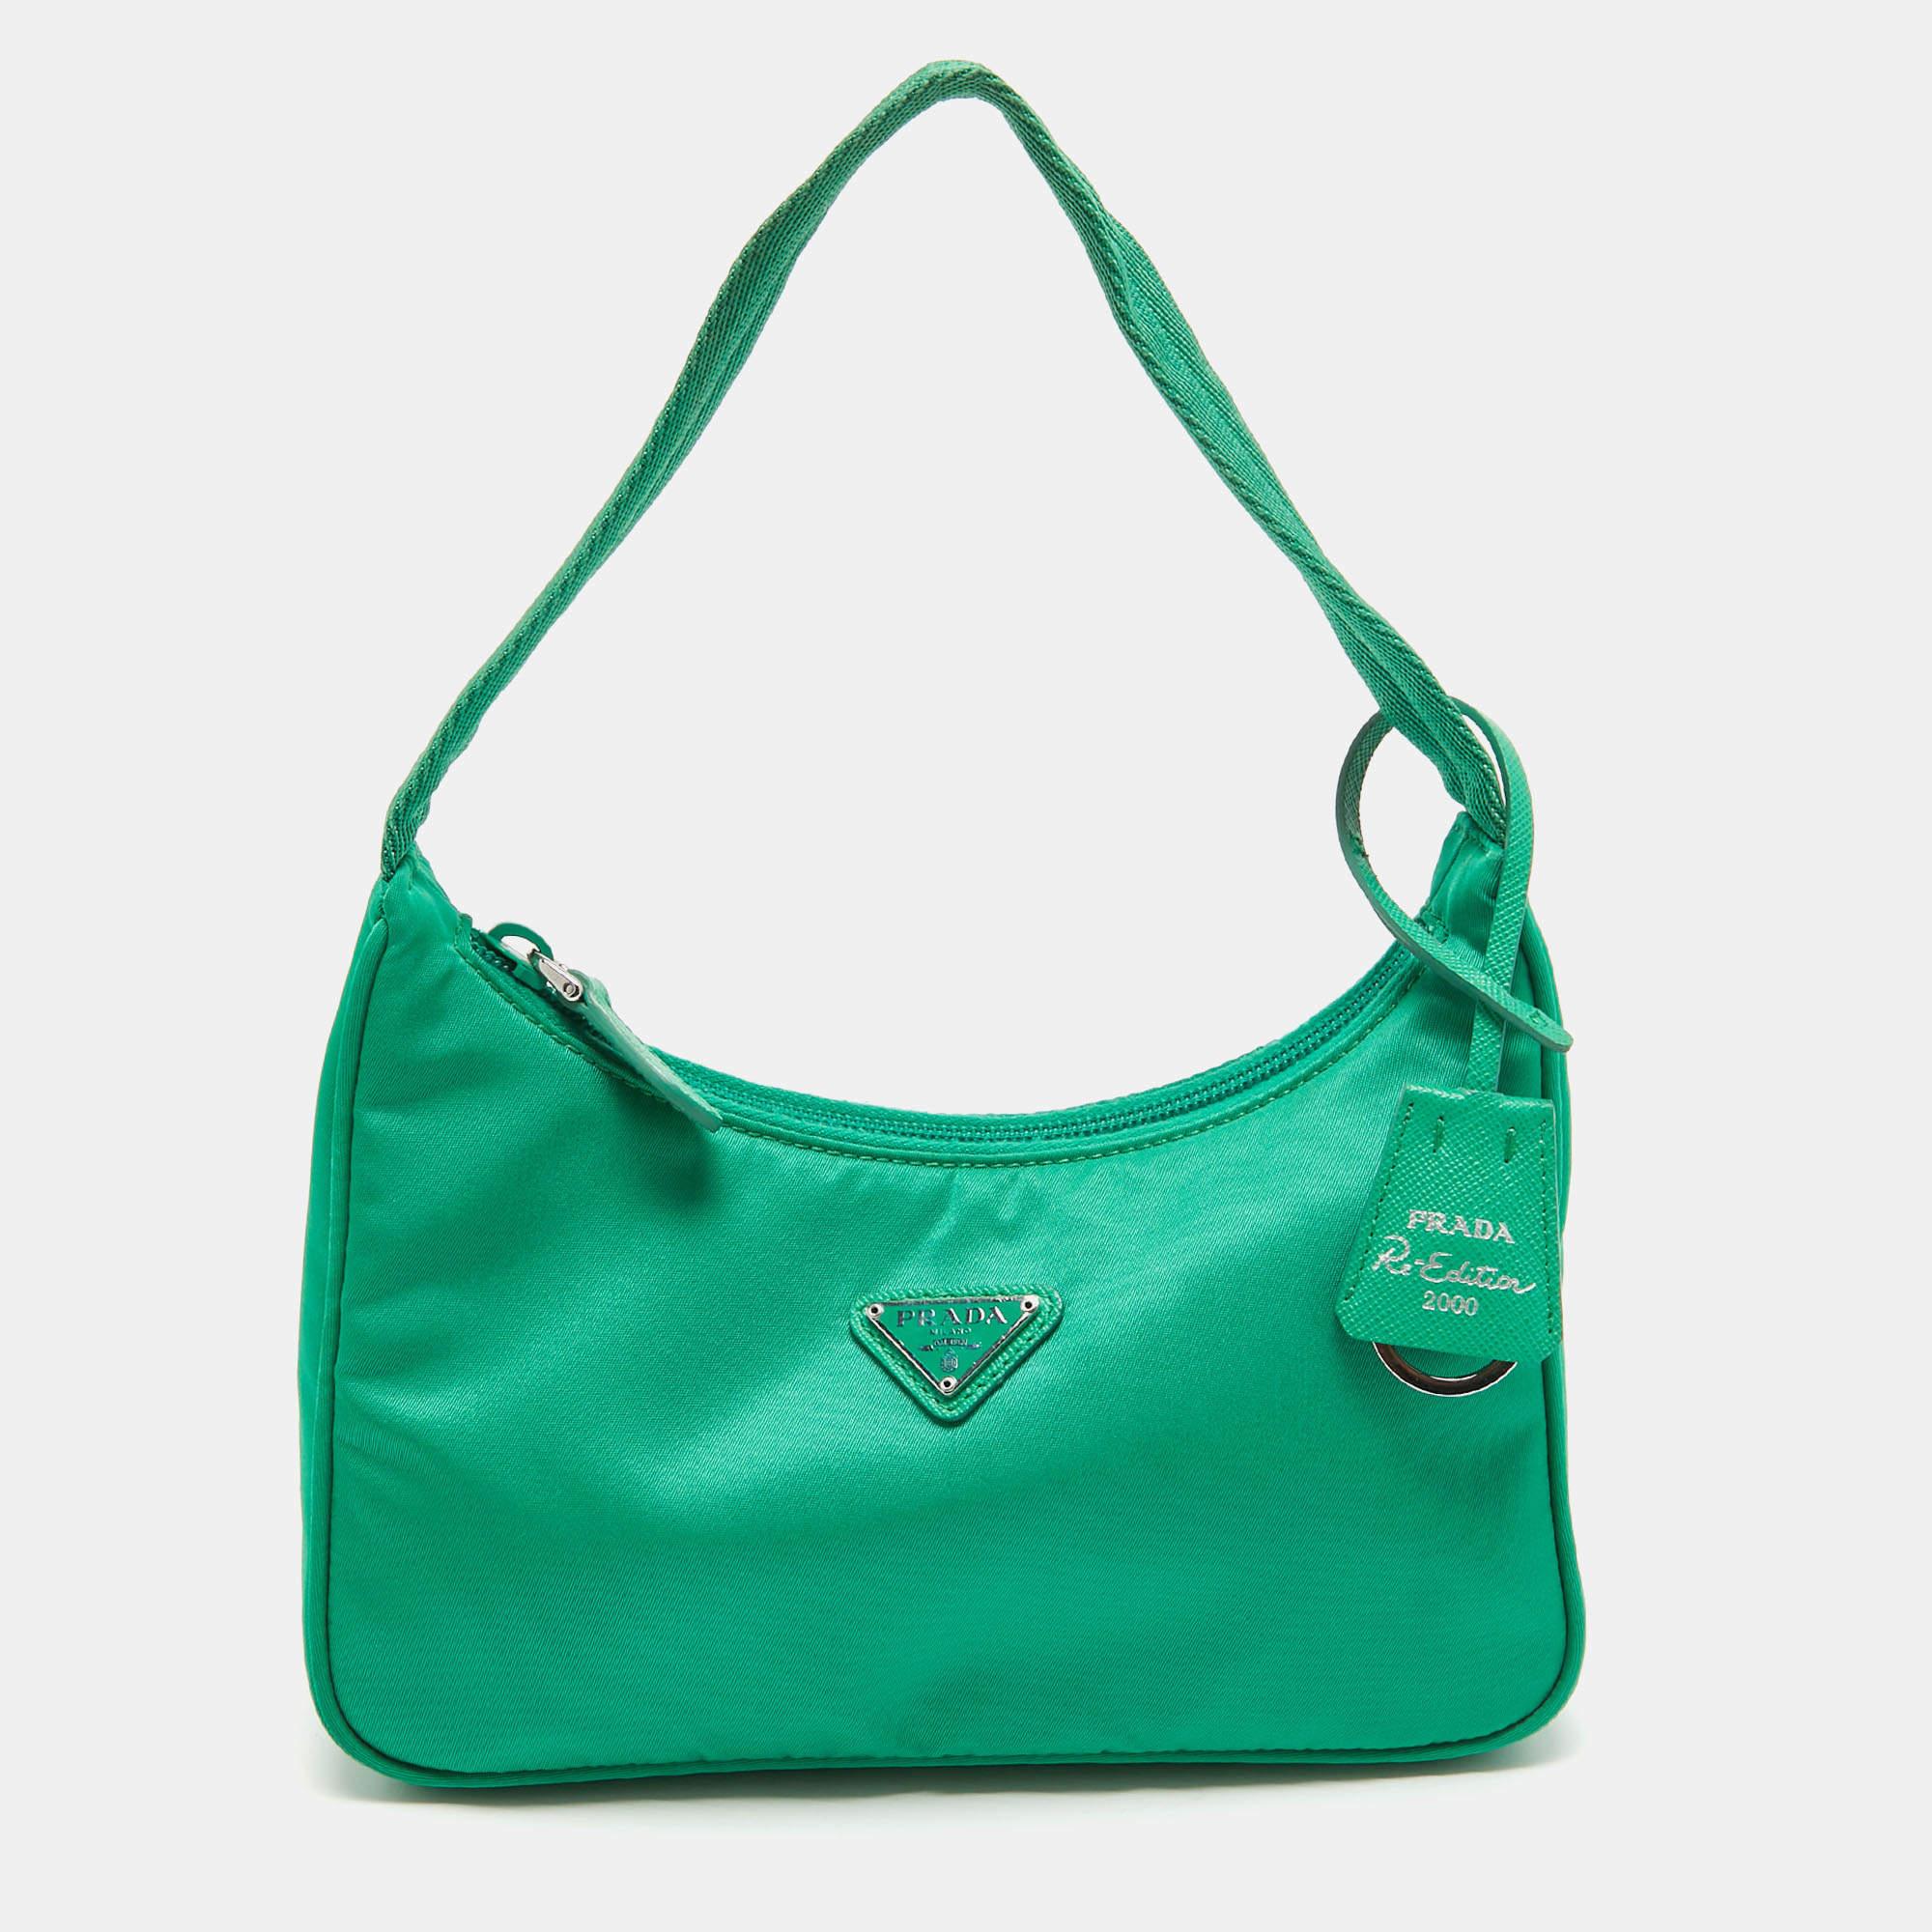 Ensure your day's essentials are in order and your outfit is complete with this Prada green bag. Crafted using the best materials, the bag carries the maison's signature of artful craftsmanship and enduring appeal.

Includes: Brand Dustbag

